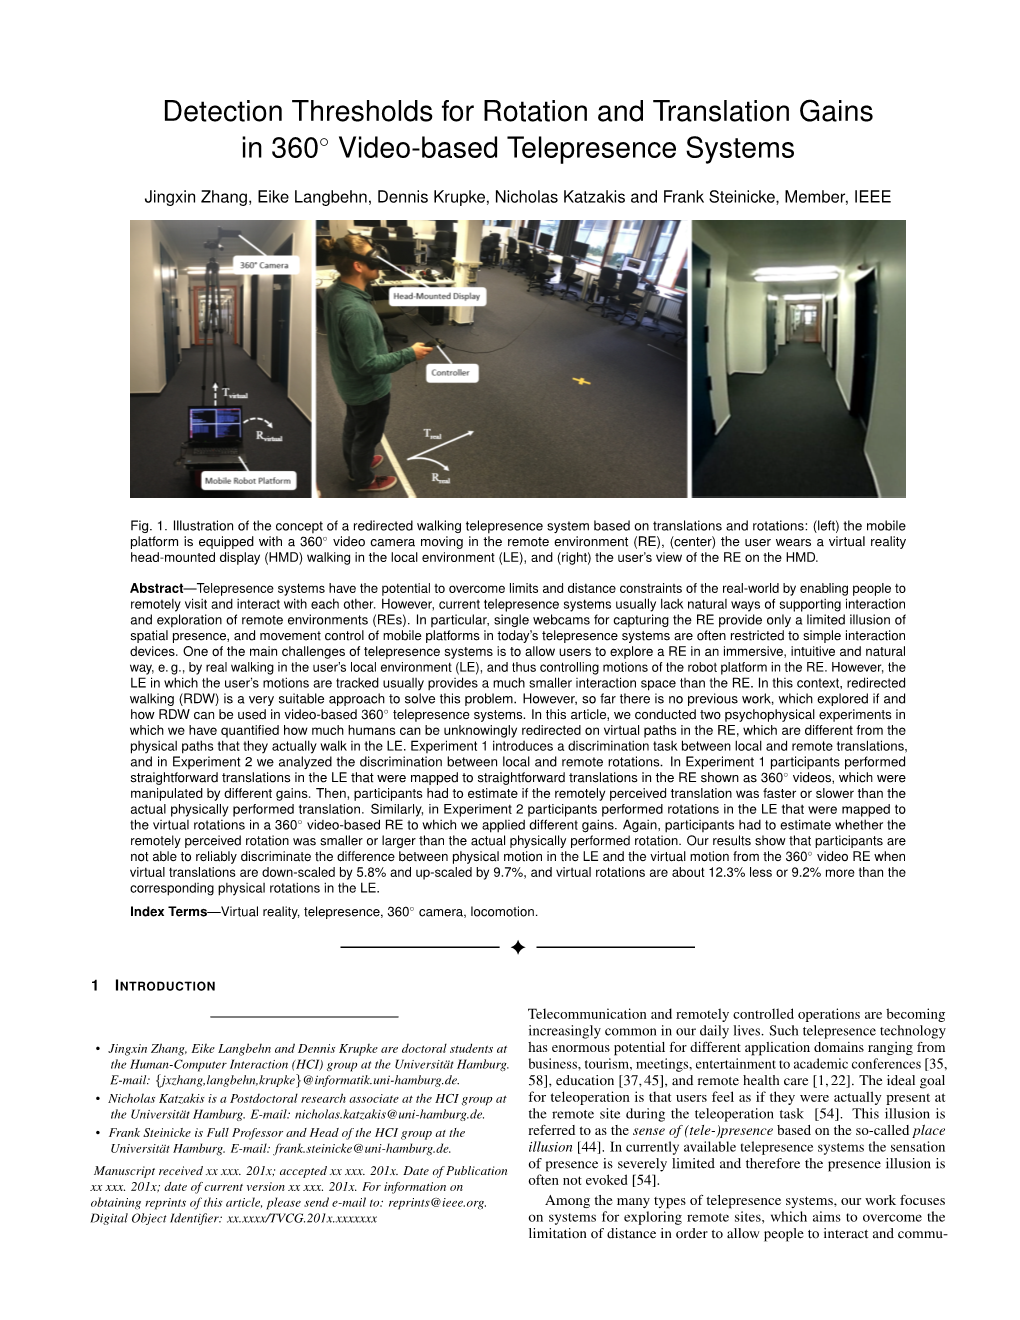 Detection Thresholds for Rotation and Translation Gains in 360 Video-Based Telepresence Systems